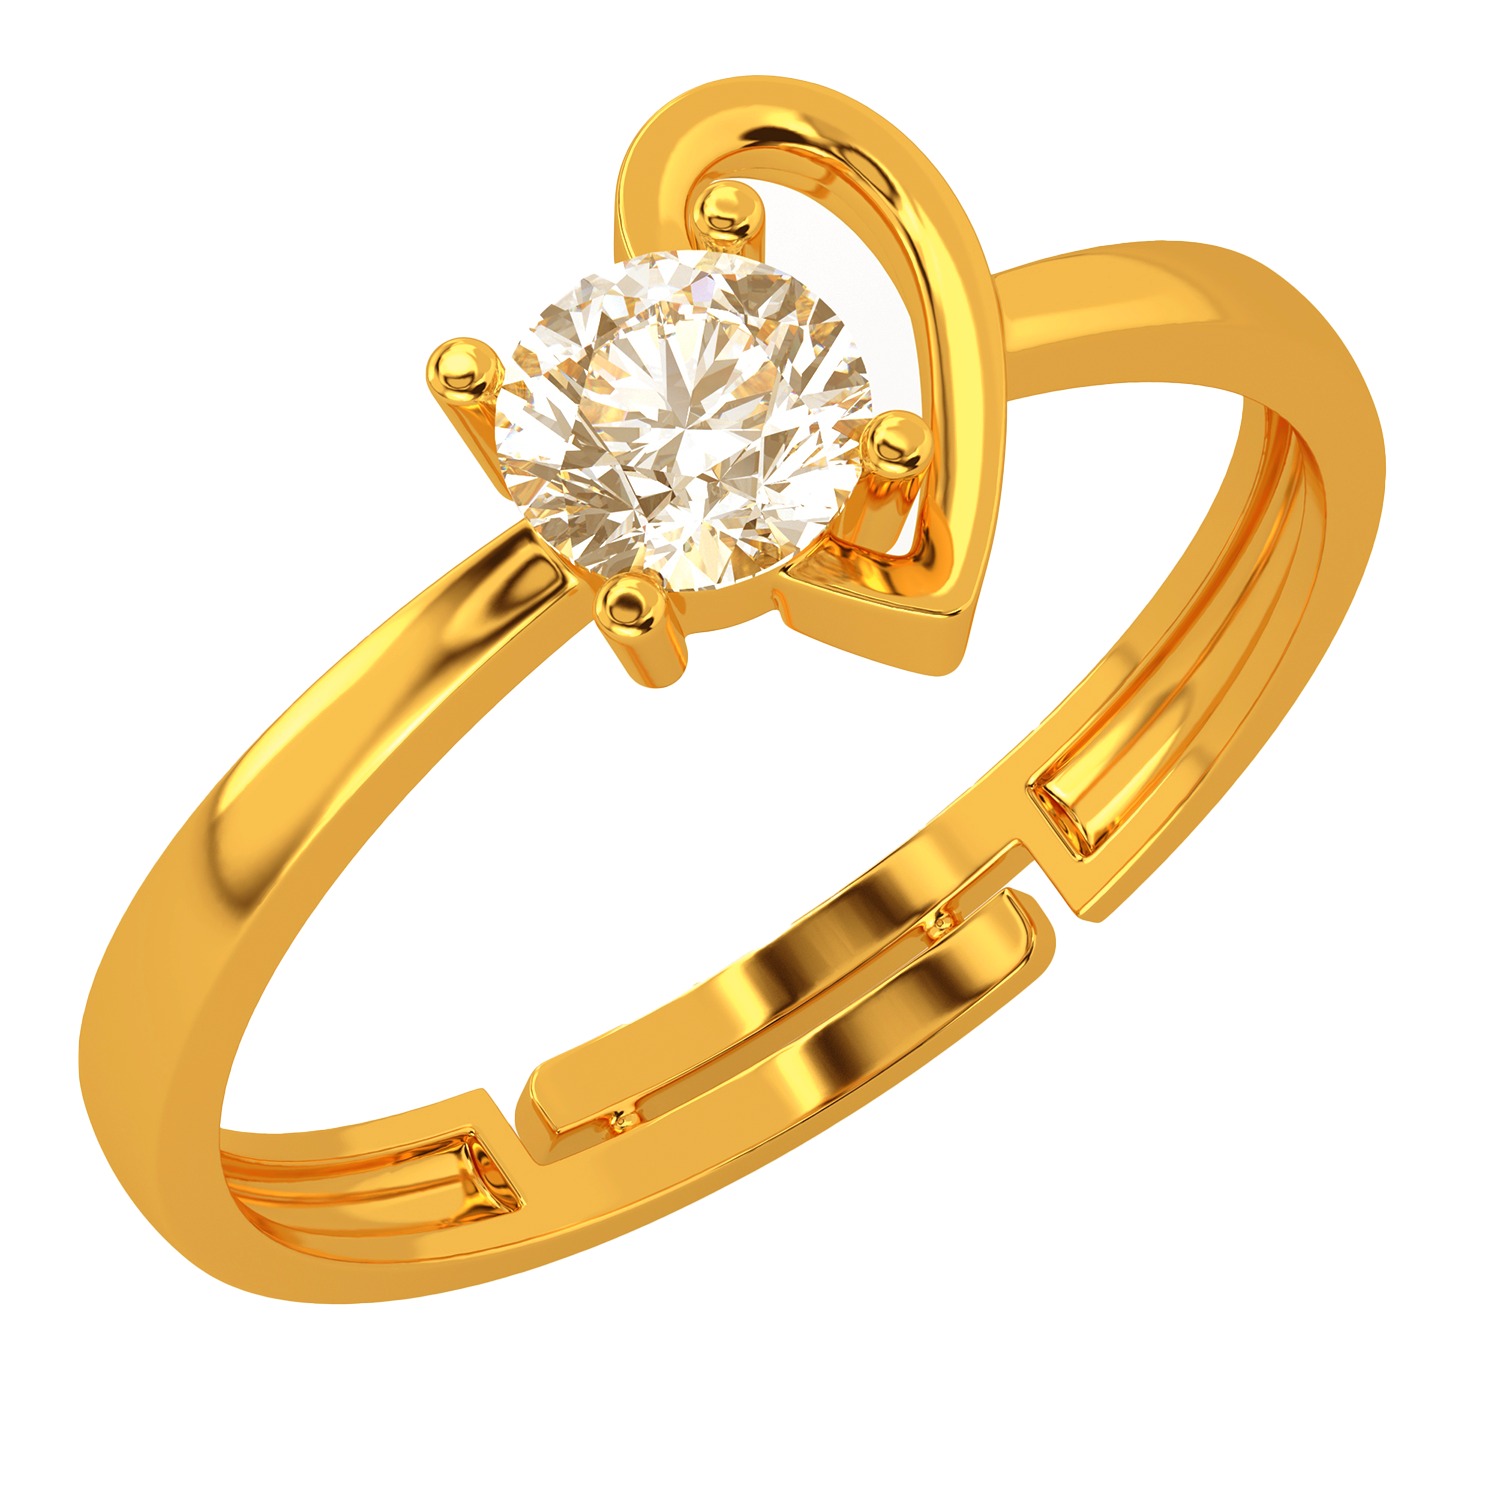 Grab And Download Jewelry Icon - Ring Jewellery Designs Png, Transparent Png  , Transparent Png Image - PNGitem